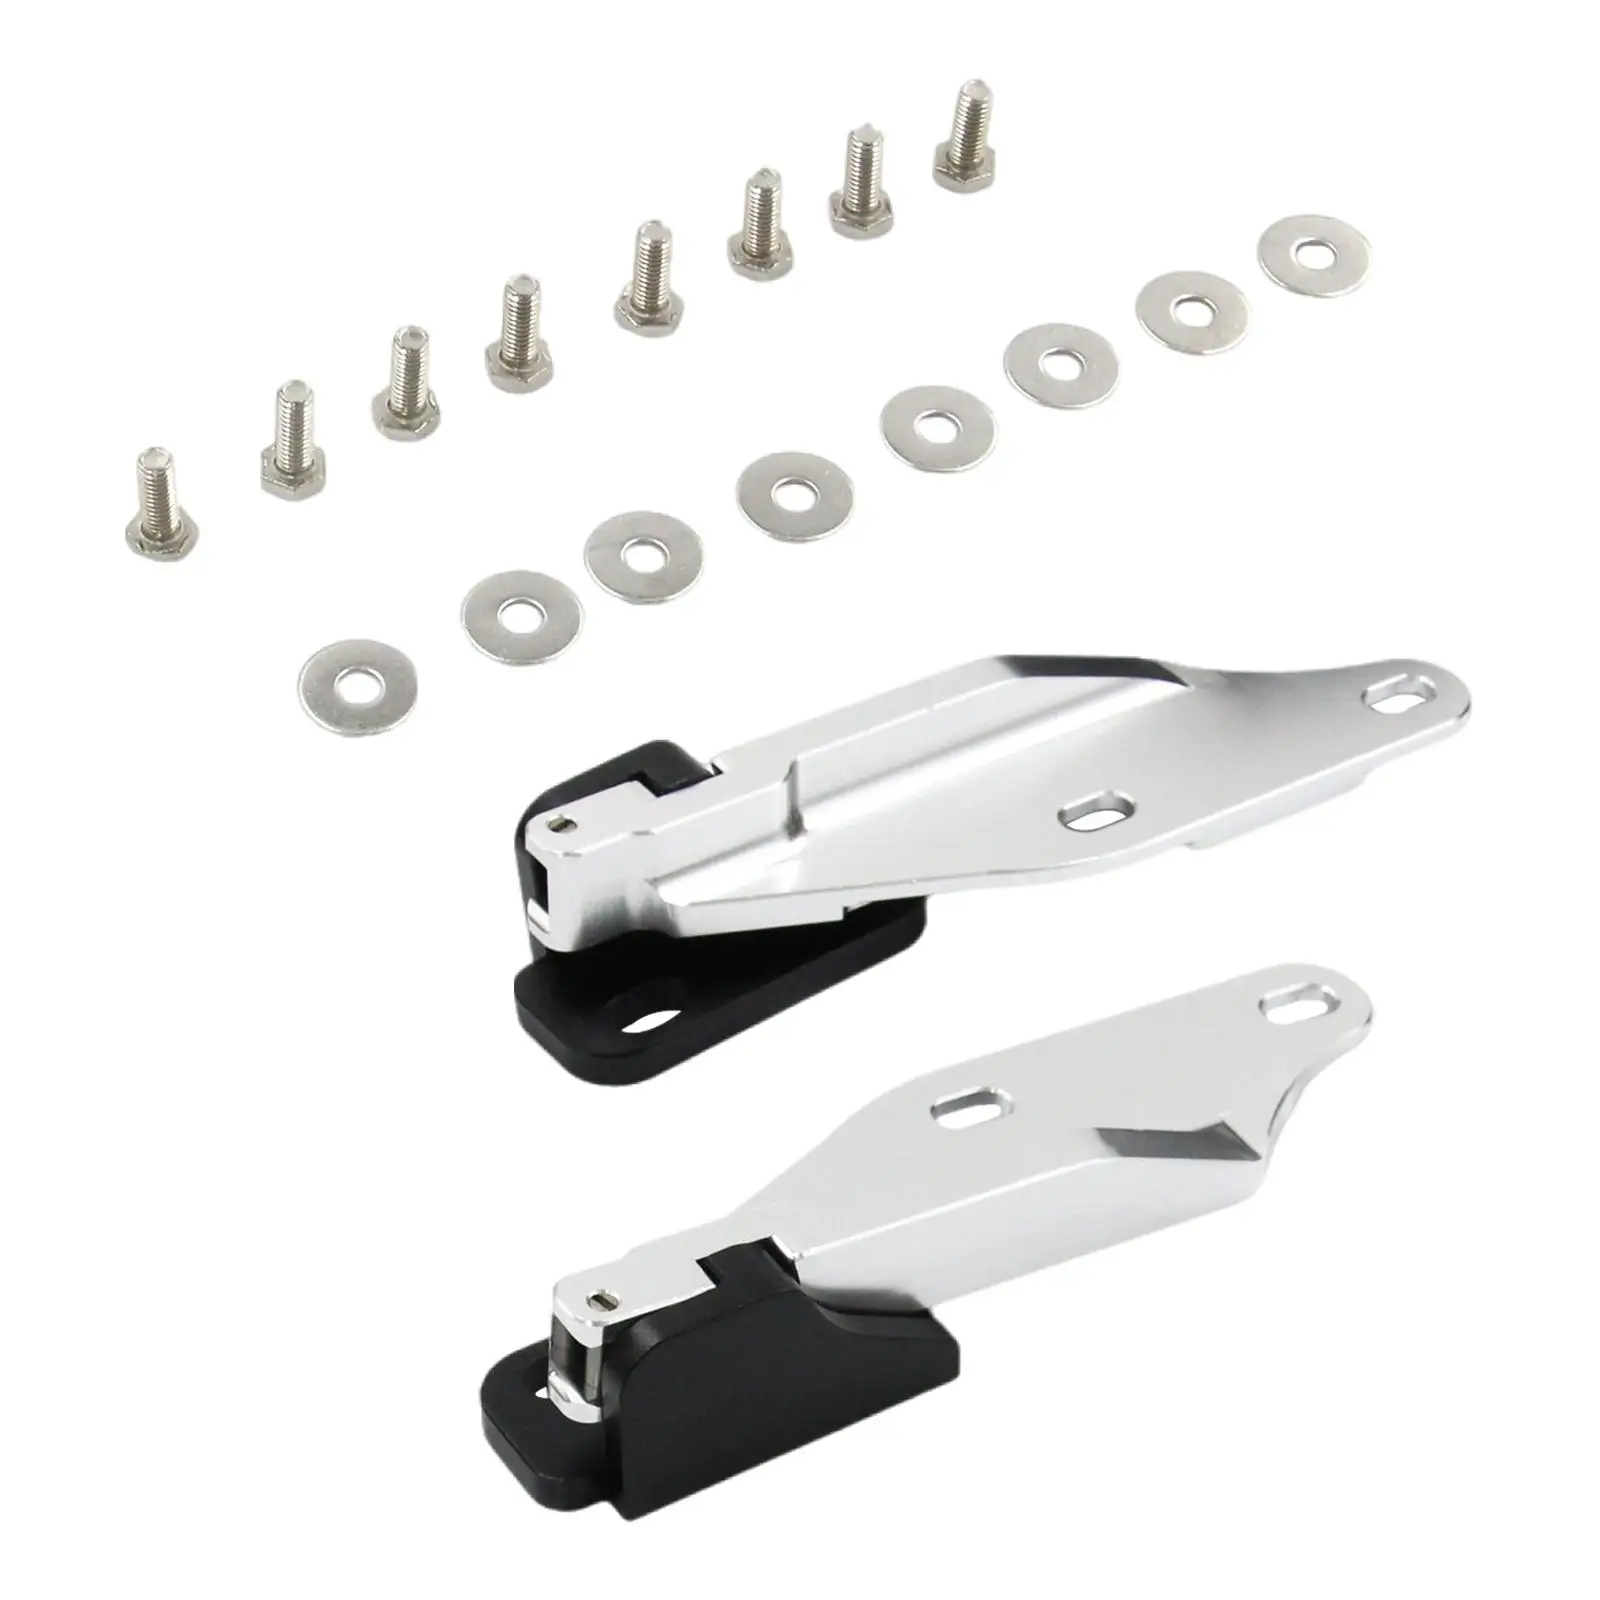 2 Pieces Quick Release Hood Hinge Accessories ,Auto High Strength, Durable